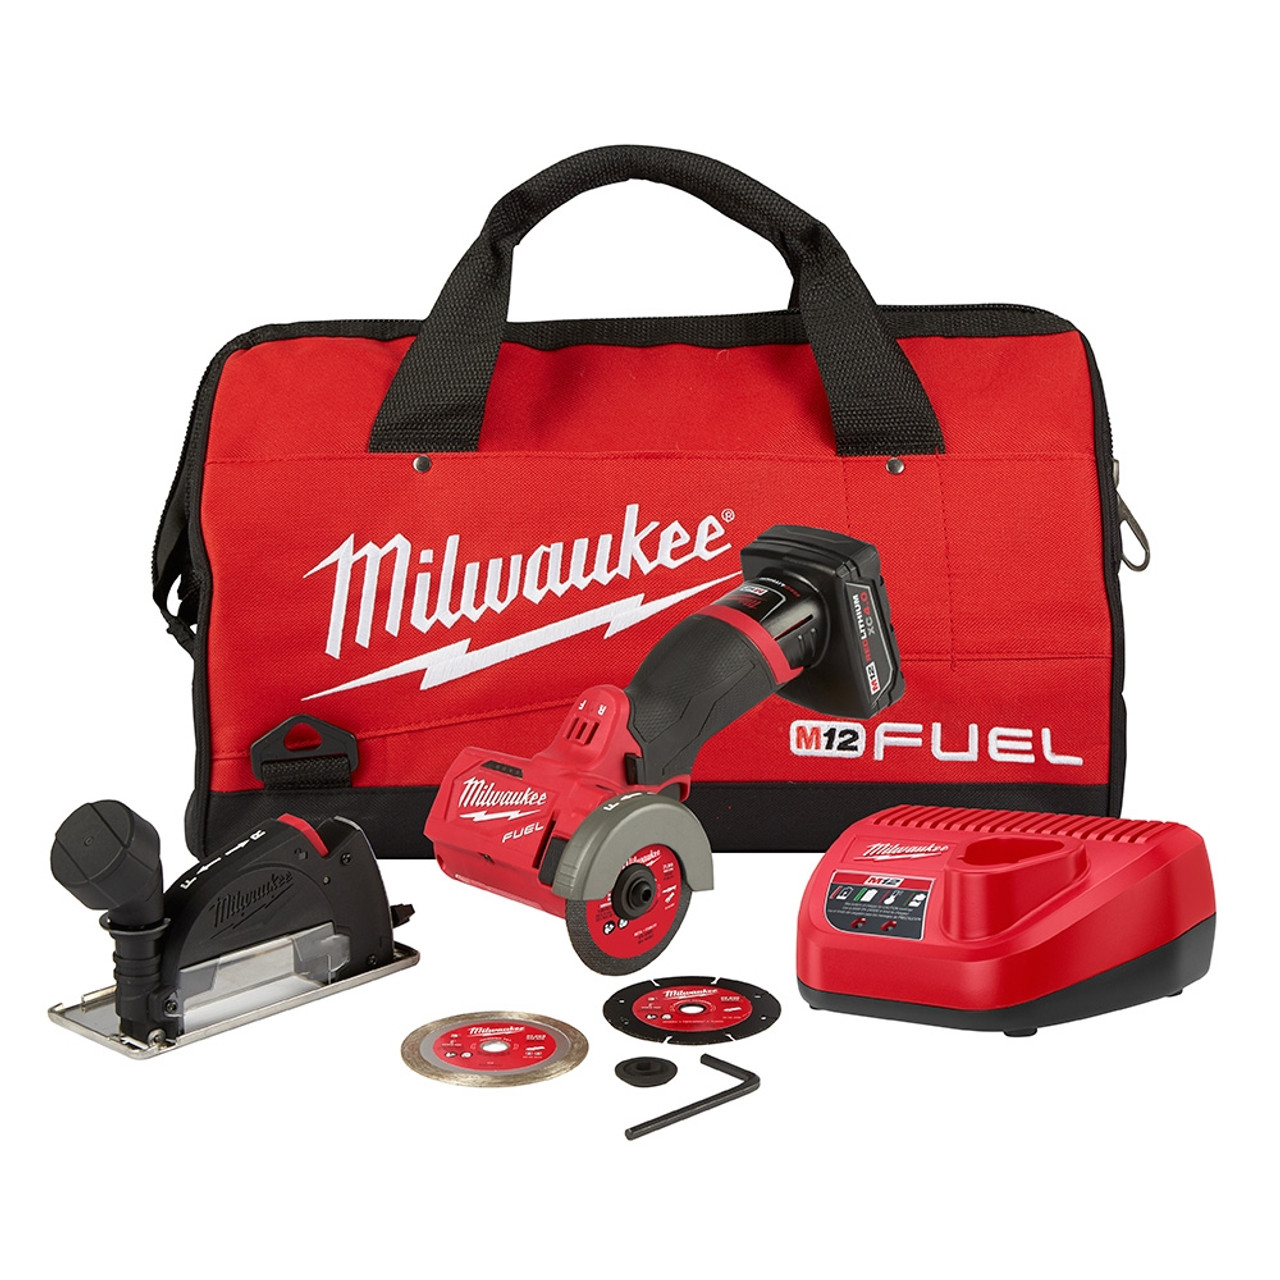 Milwaukee 2522-21XC M12 FUEL in. Compact Cut Off Tool Kit